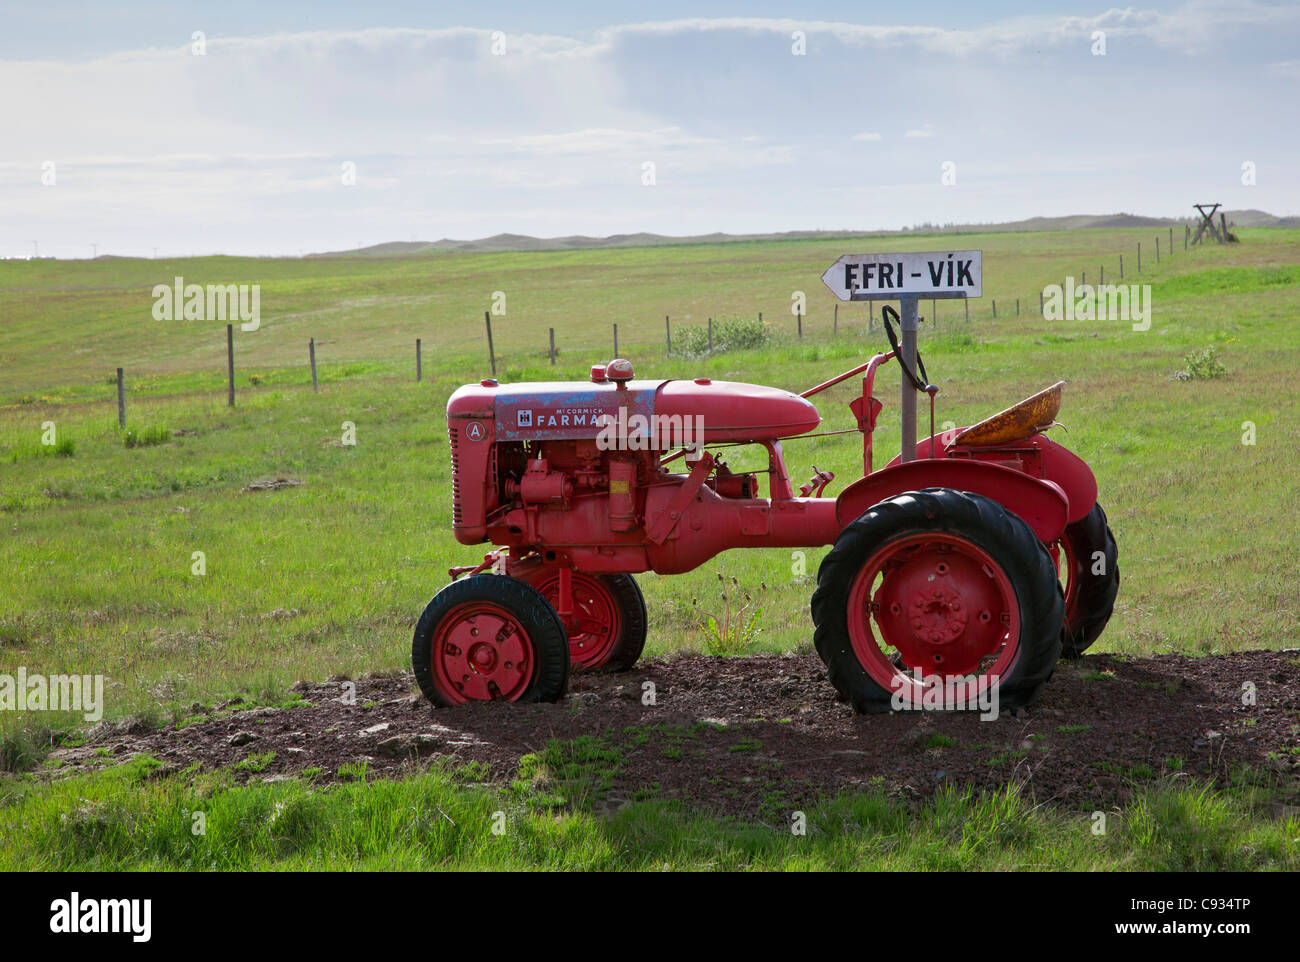 A small Farmall tractor made just before World War 11 has been turned into an unusual road sign to Efrivik. Stock Photo